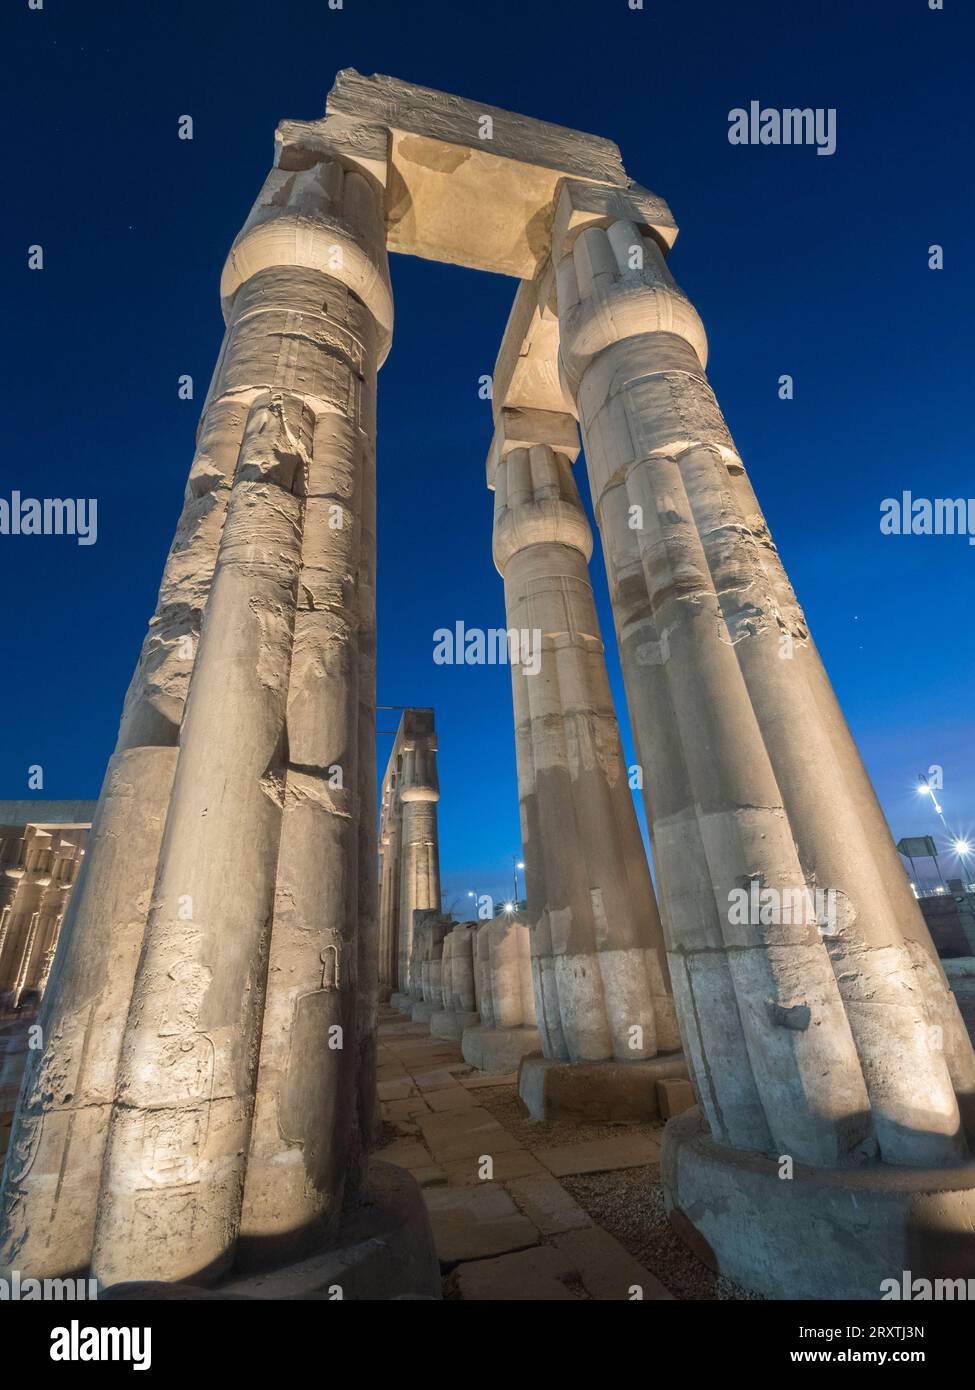 The Luxor Temple at night, a large Ancient Egyptian temple complex constructed approximately 1400 BCE, UNESCO World Heritage Site, Luxor, Thebes Stock Photo